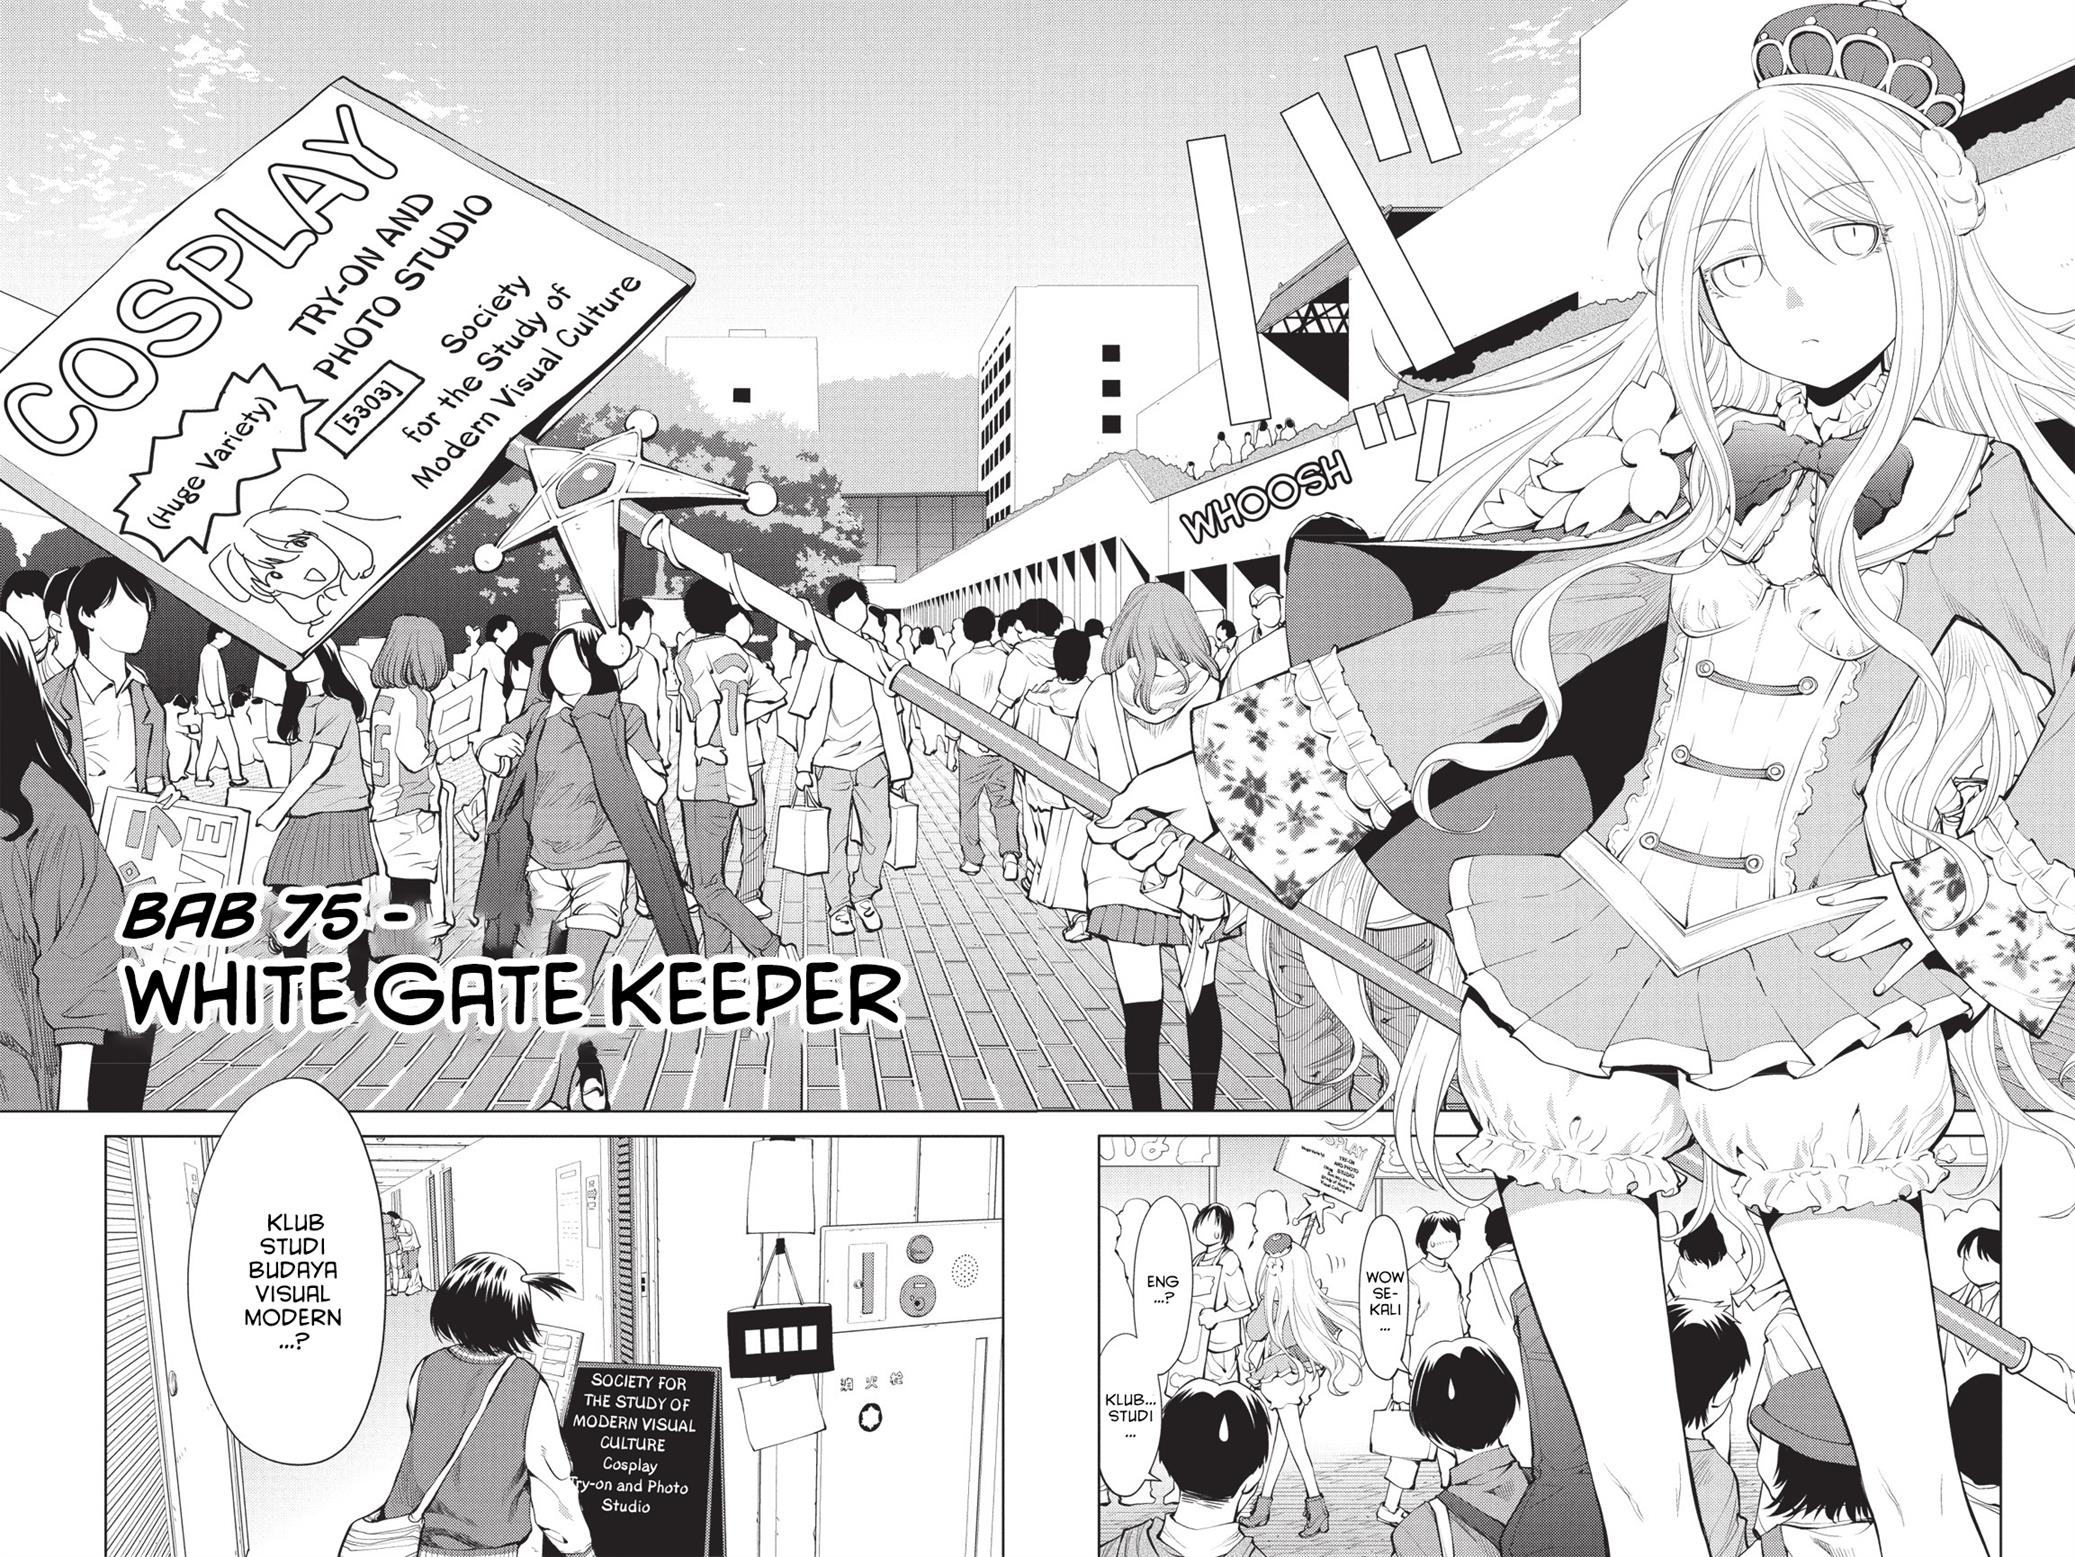 Genshiken – The Society for the Study of Modern Visual Culture Chapter 75 Image 1